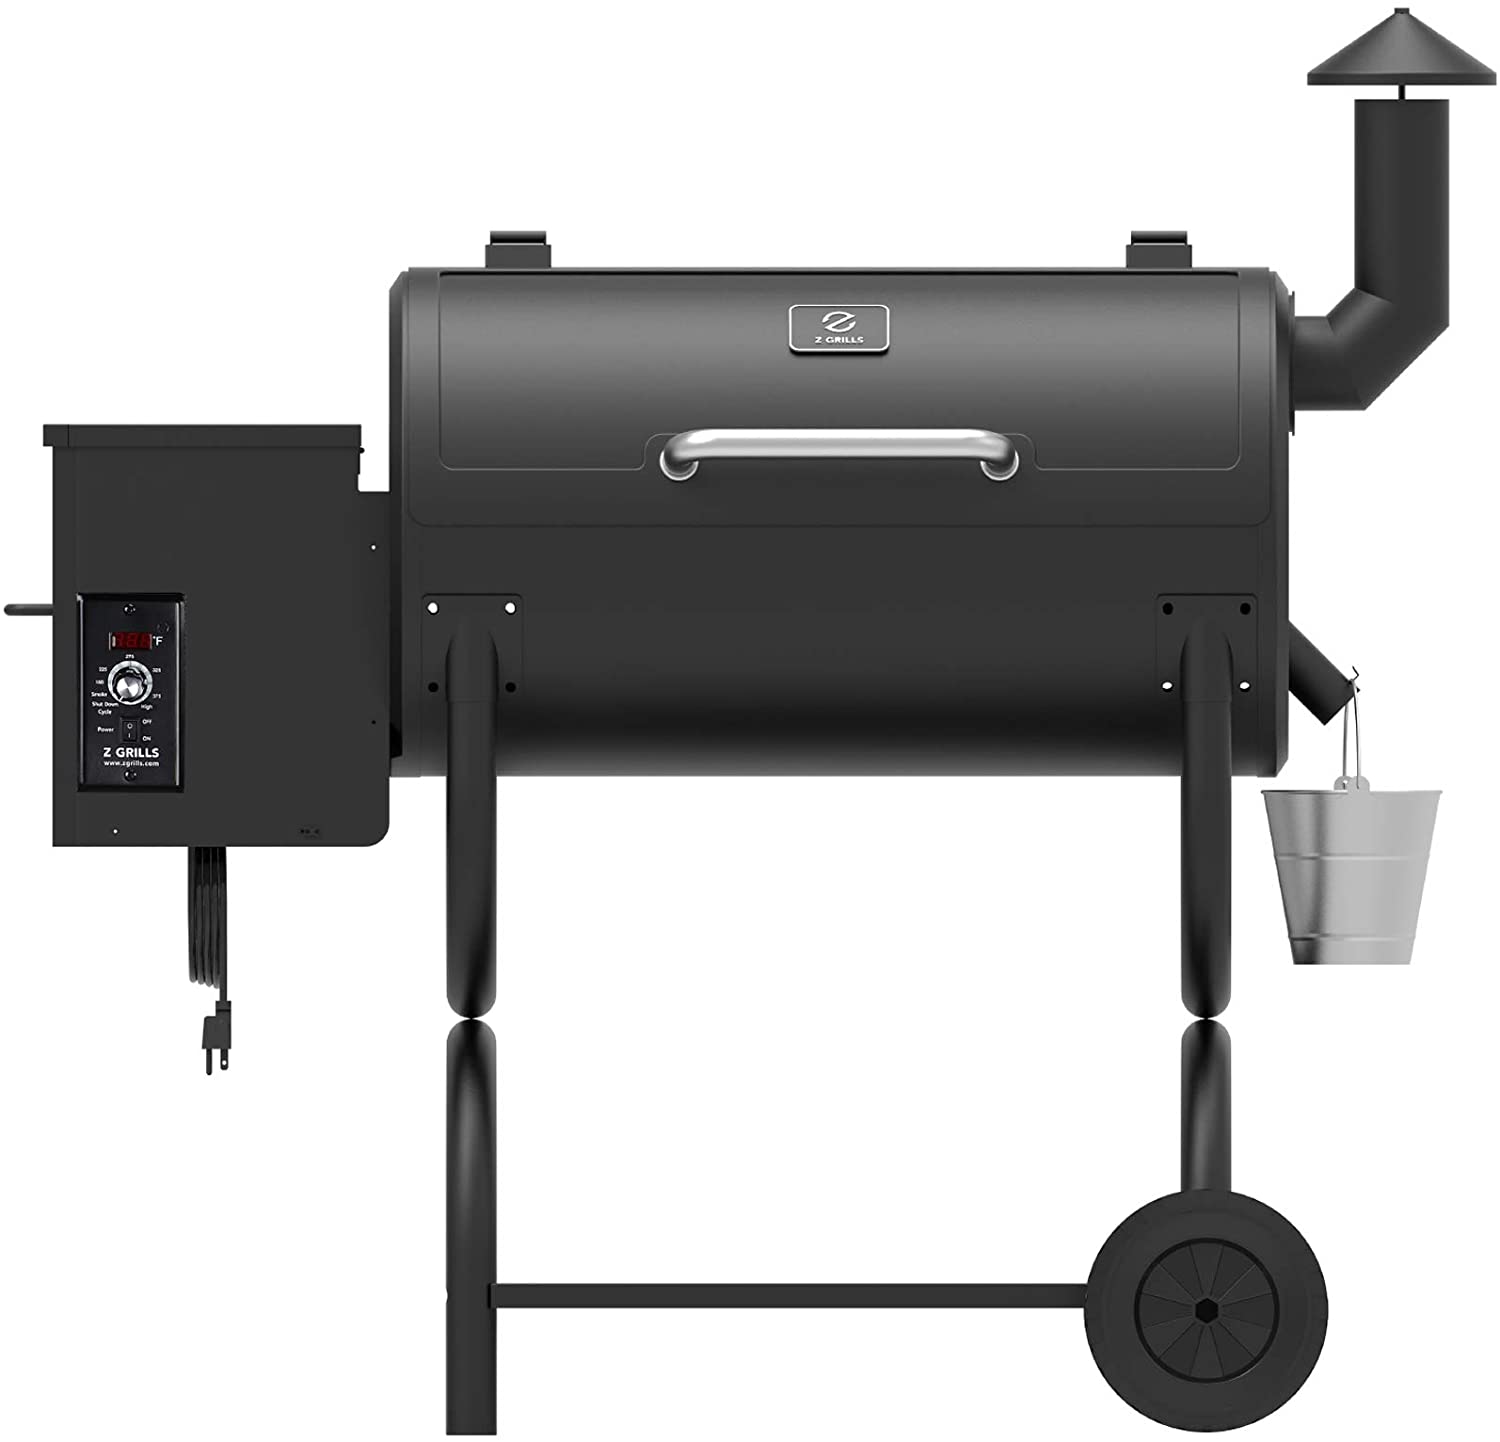 Z GRILLS ZPG 550B 2020 Upgrade Wood Pellet Grill Smoker 8 in 1 BBQ Grill Auto Temperature Control 550 sq 538sq in Black - image 2 of 10